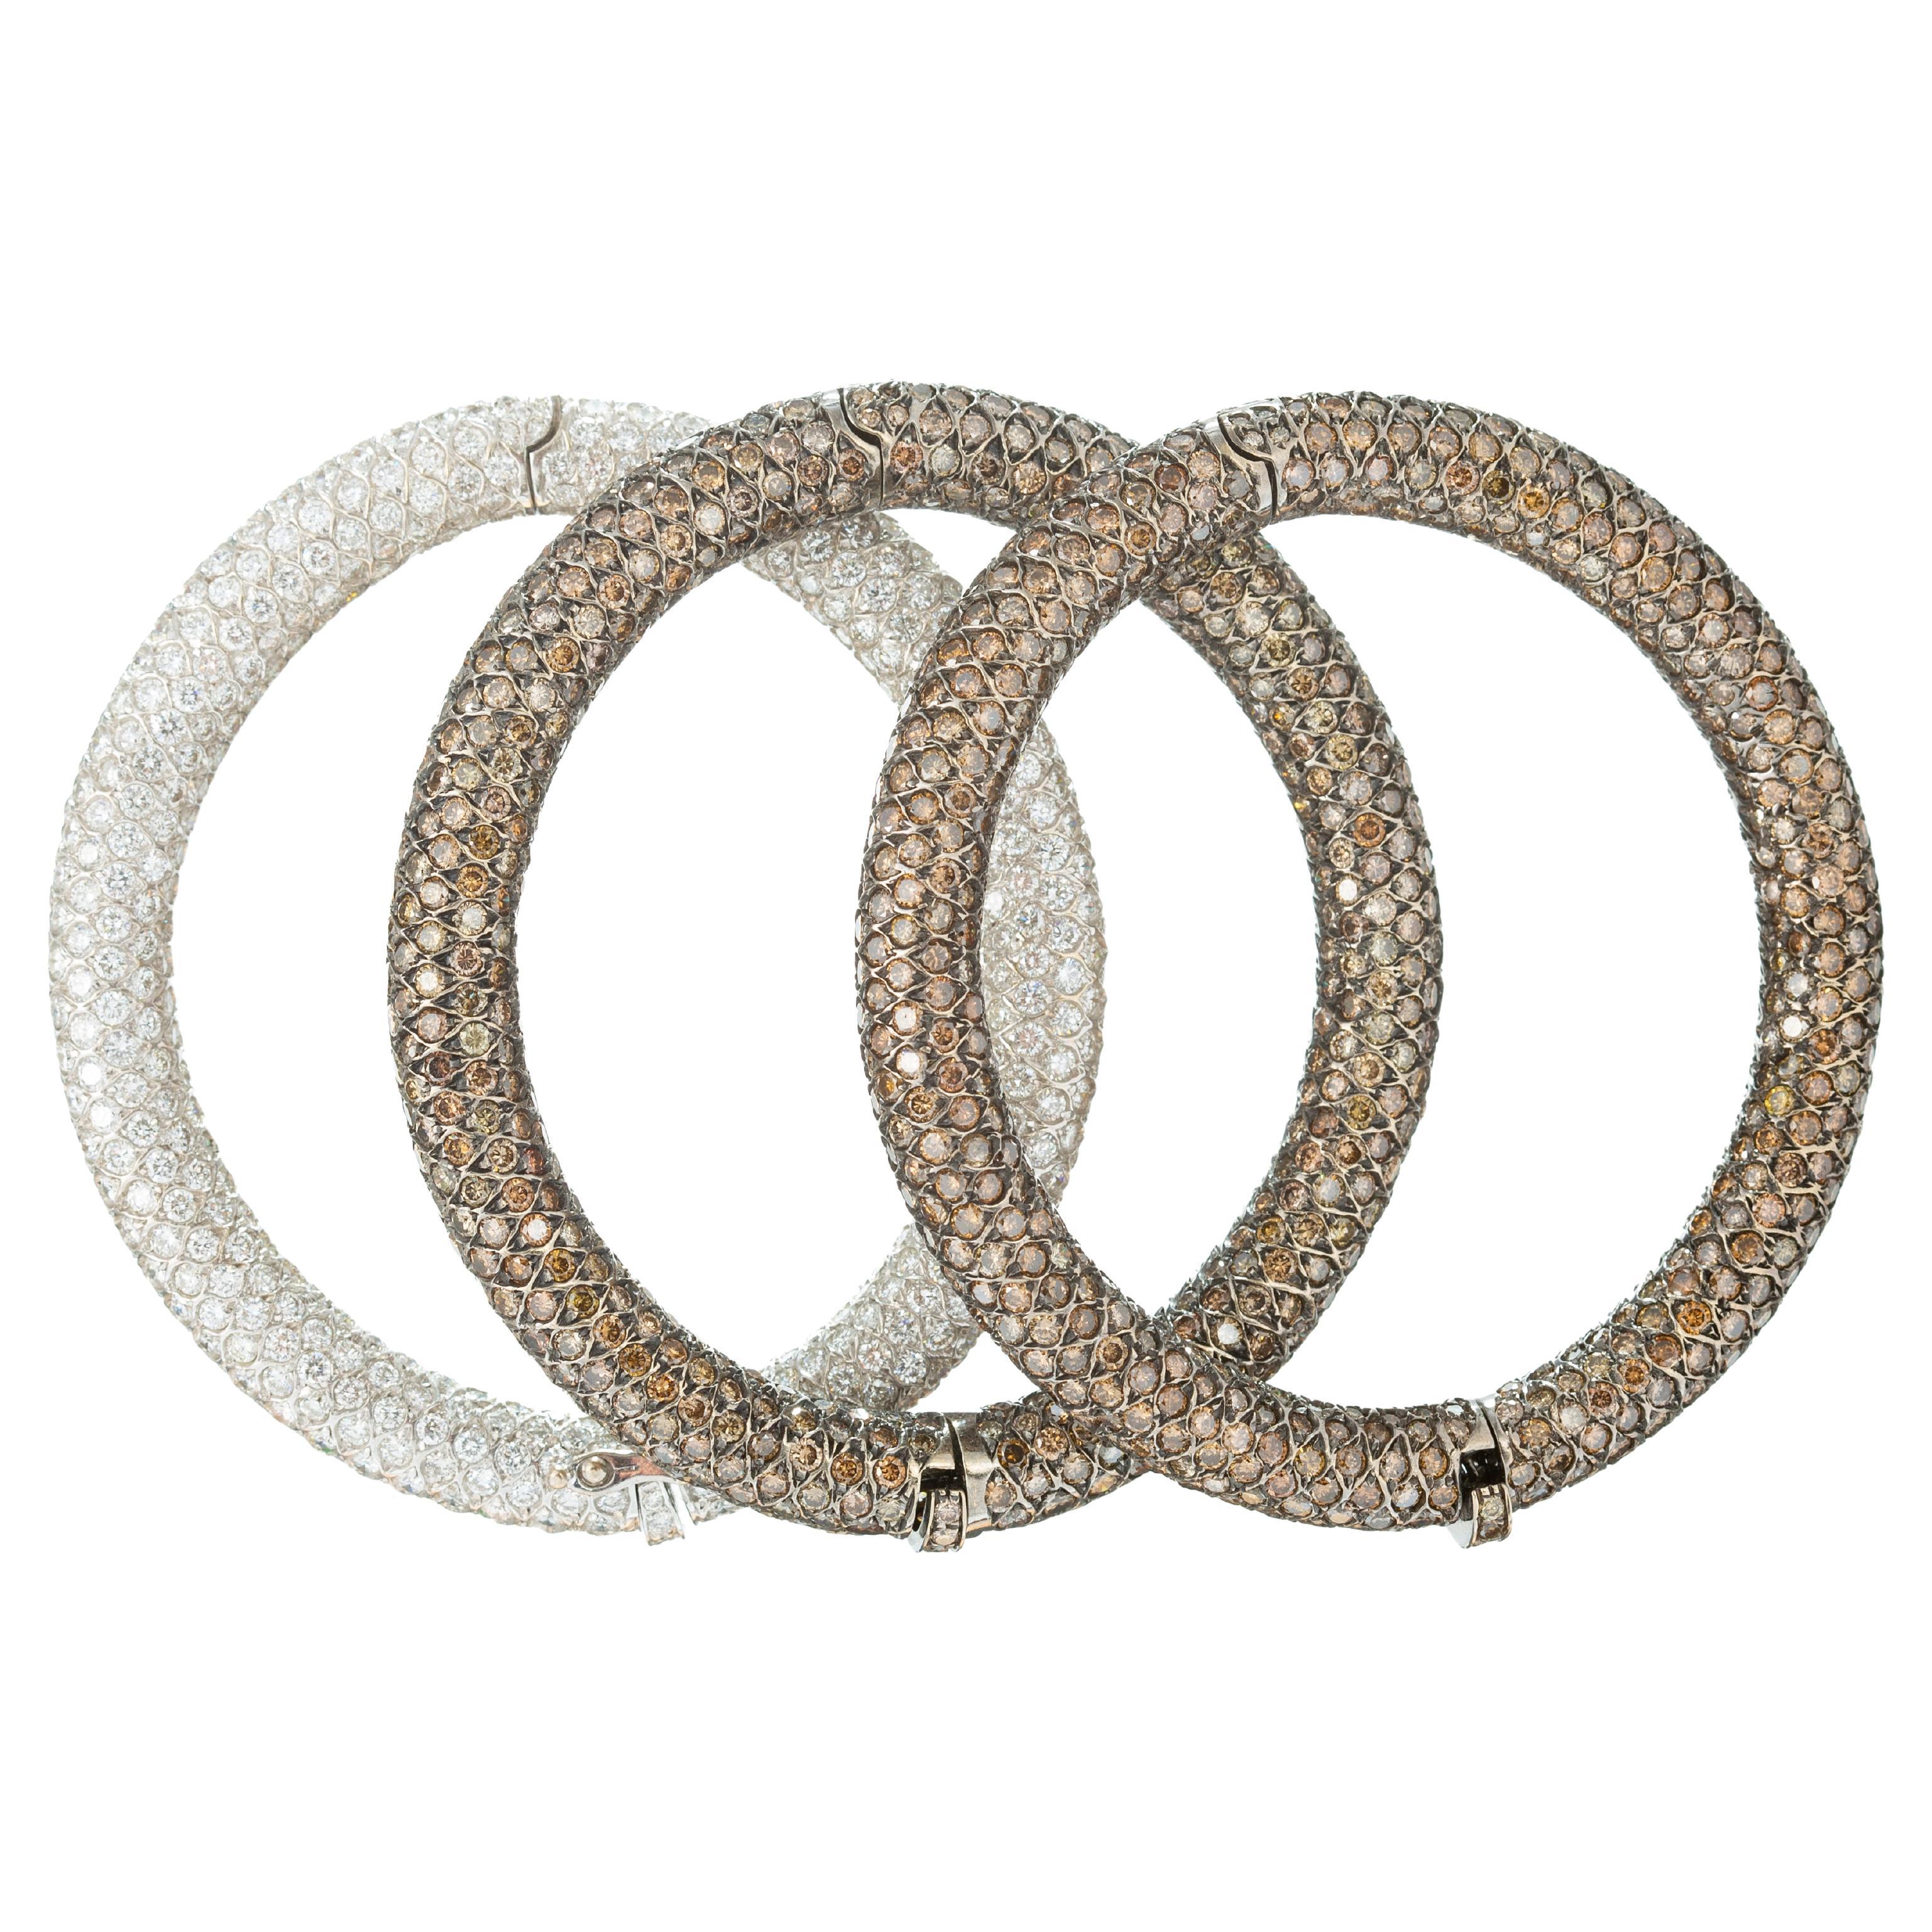 Three diamond bangle bracelets in 18k white gold, pave' set with champagne and white diamonds throughout.  One bracelet is set with four hundred thirty-seven round brilliant-cut 'white' diamonds; and two matching design bracelets in a blackened 18k